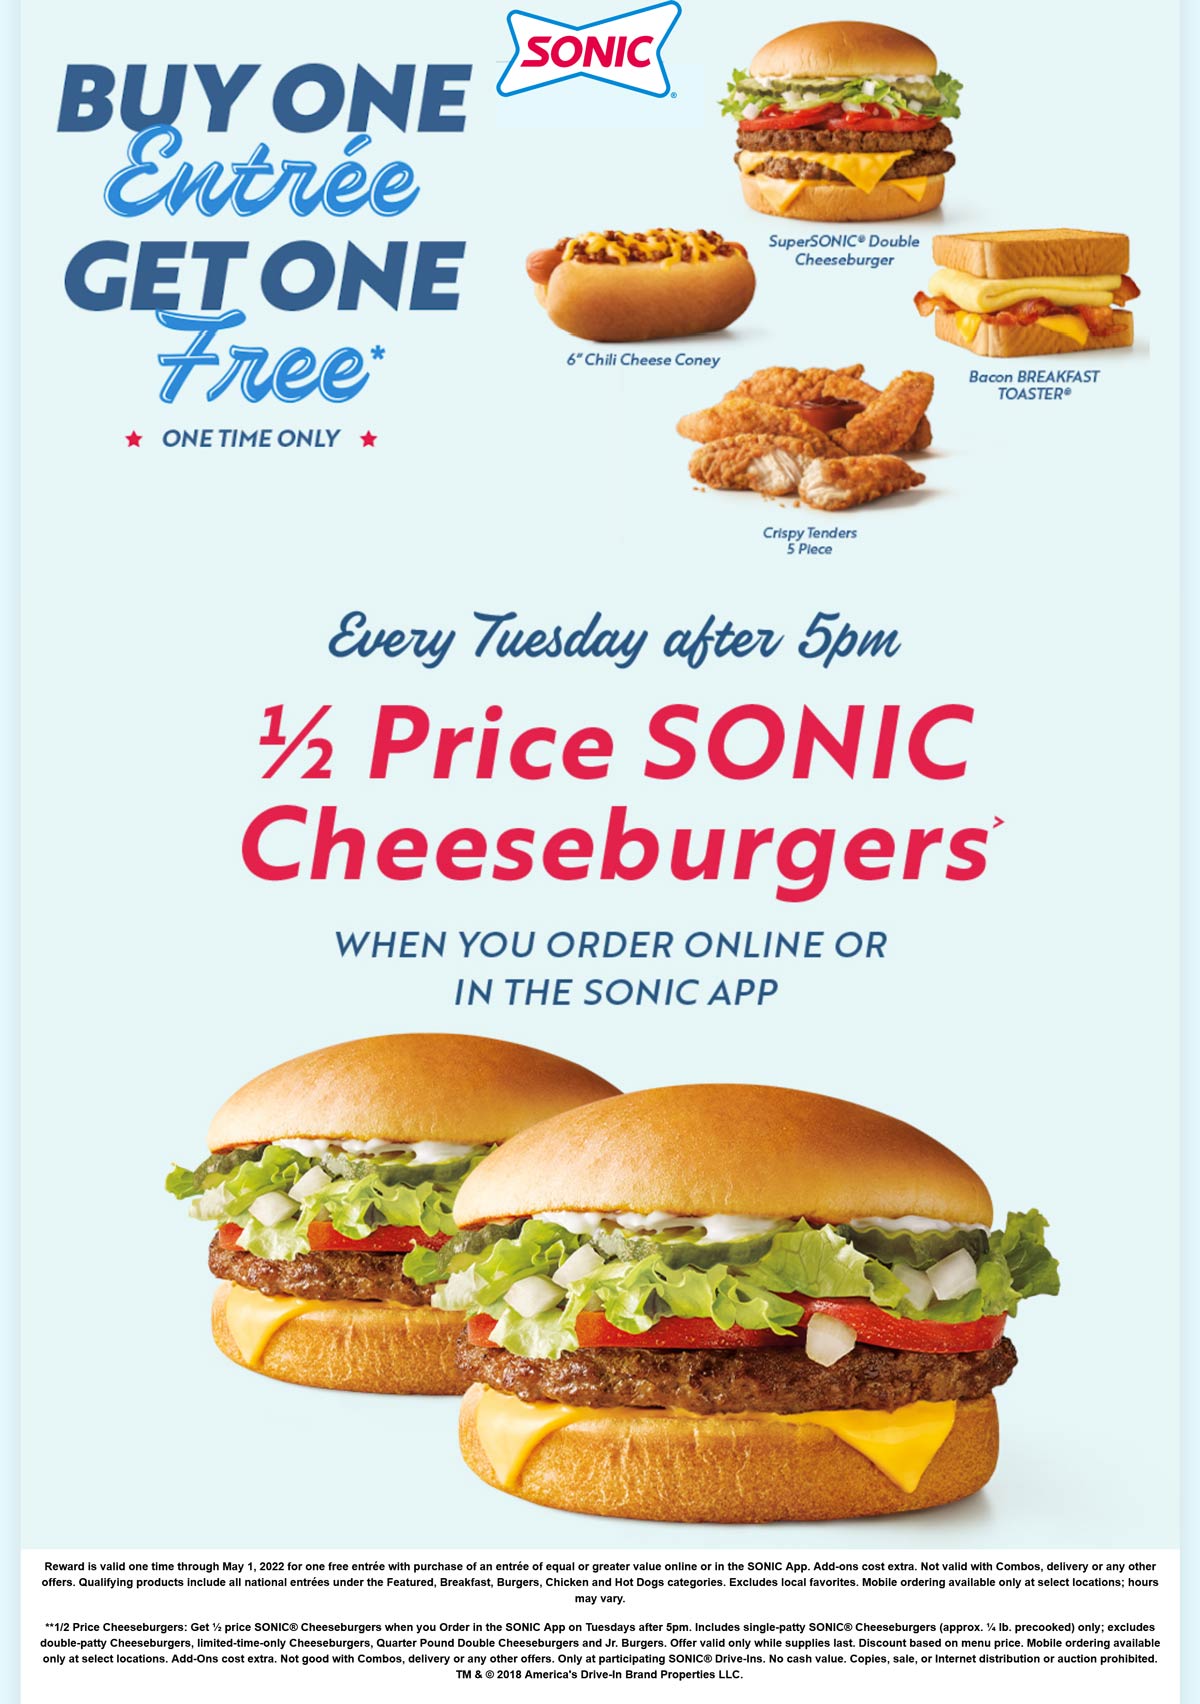 Sonic Drive-In restaurants Coupon  Second entree free logged in at Sonic Drive-In #sonicdrivein 